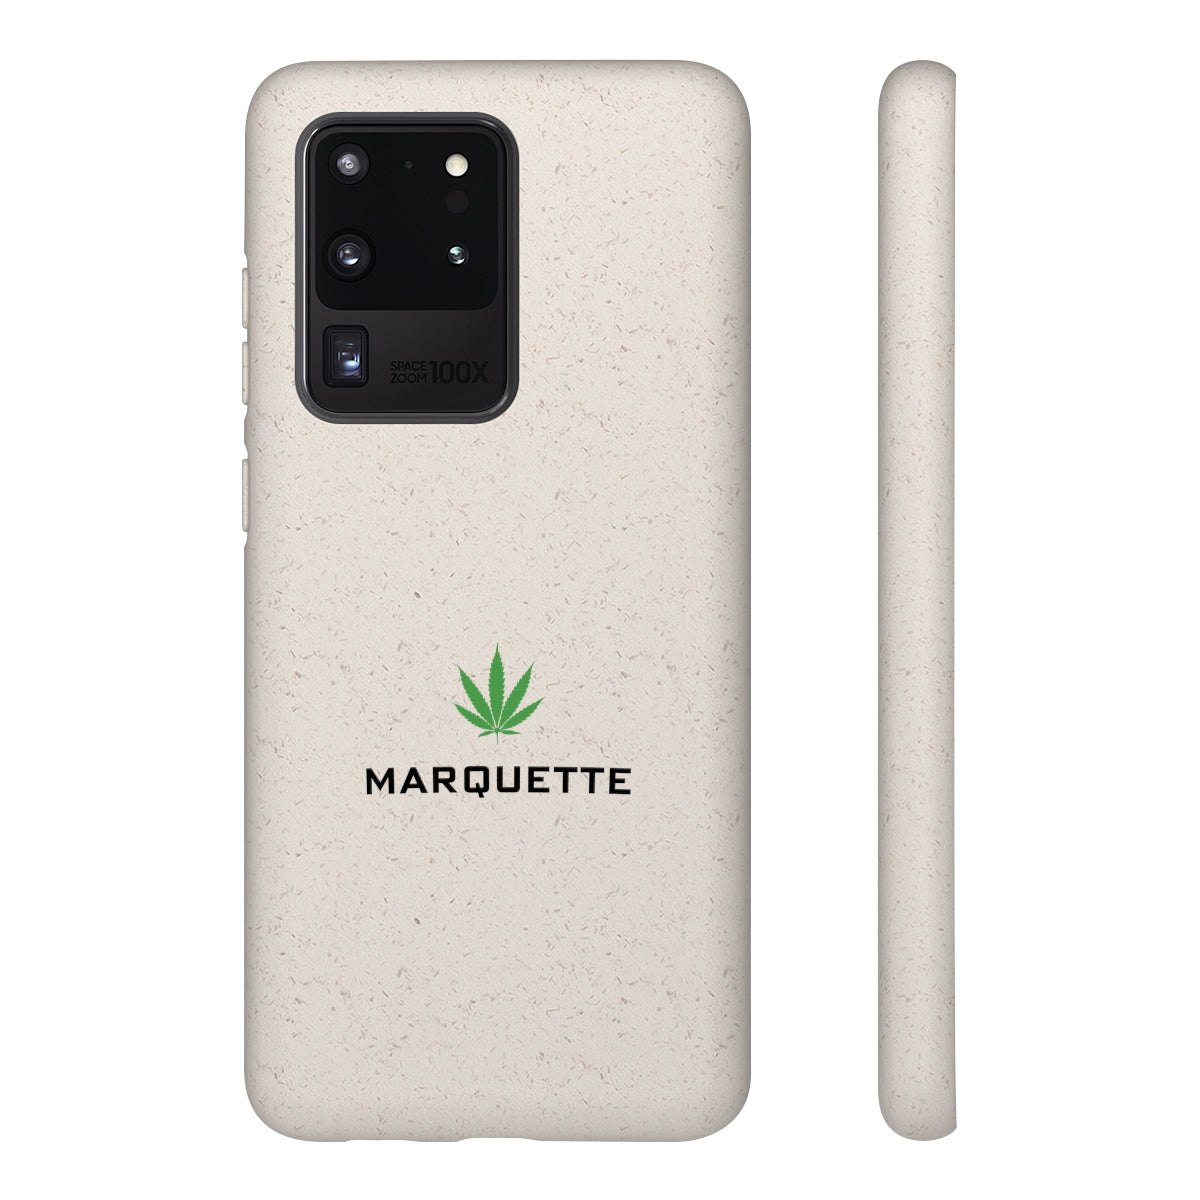 'Marquette' Phone Cases (w/ Cannabis Leaf) | Android & iPhone